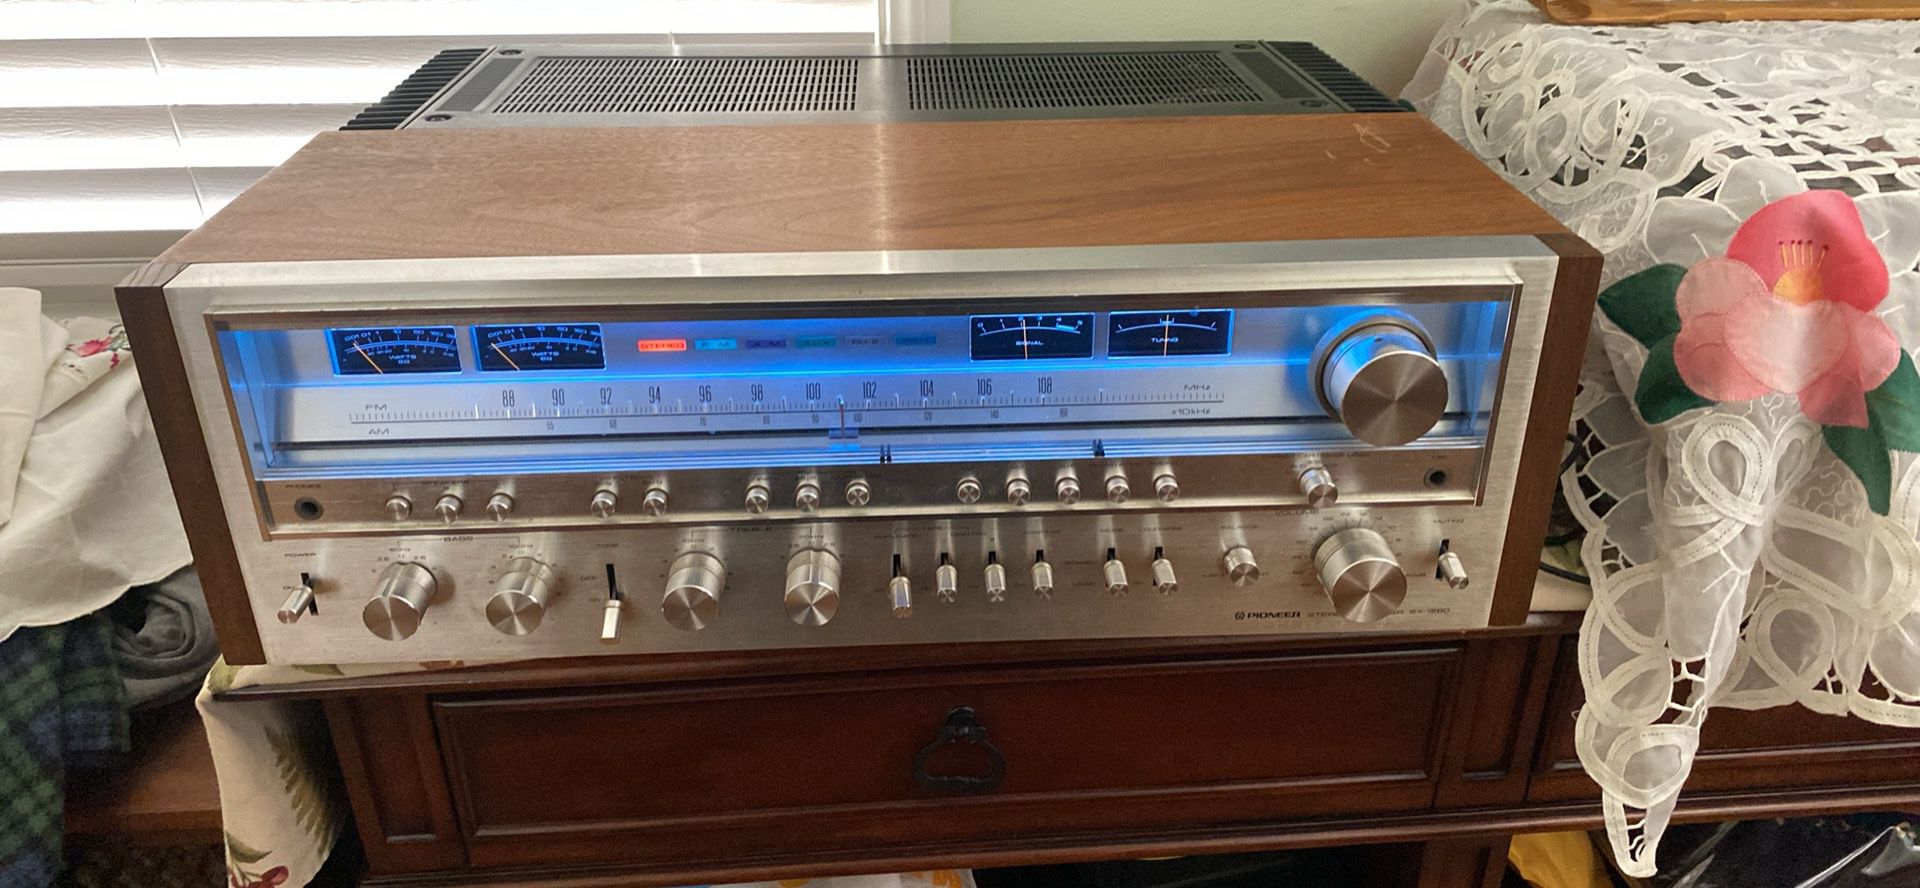 Pioneer Sx 1280 stereo receiver